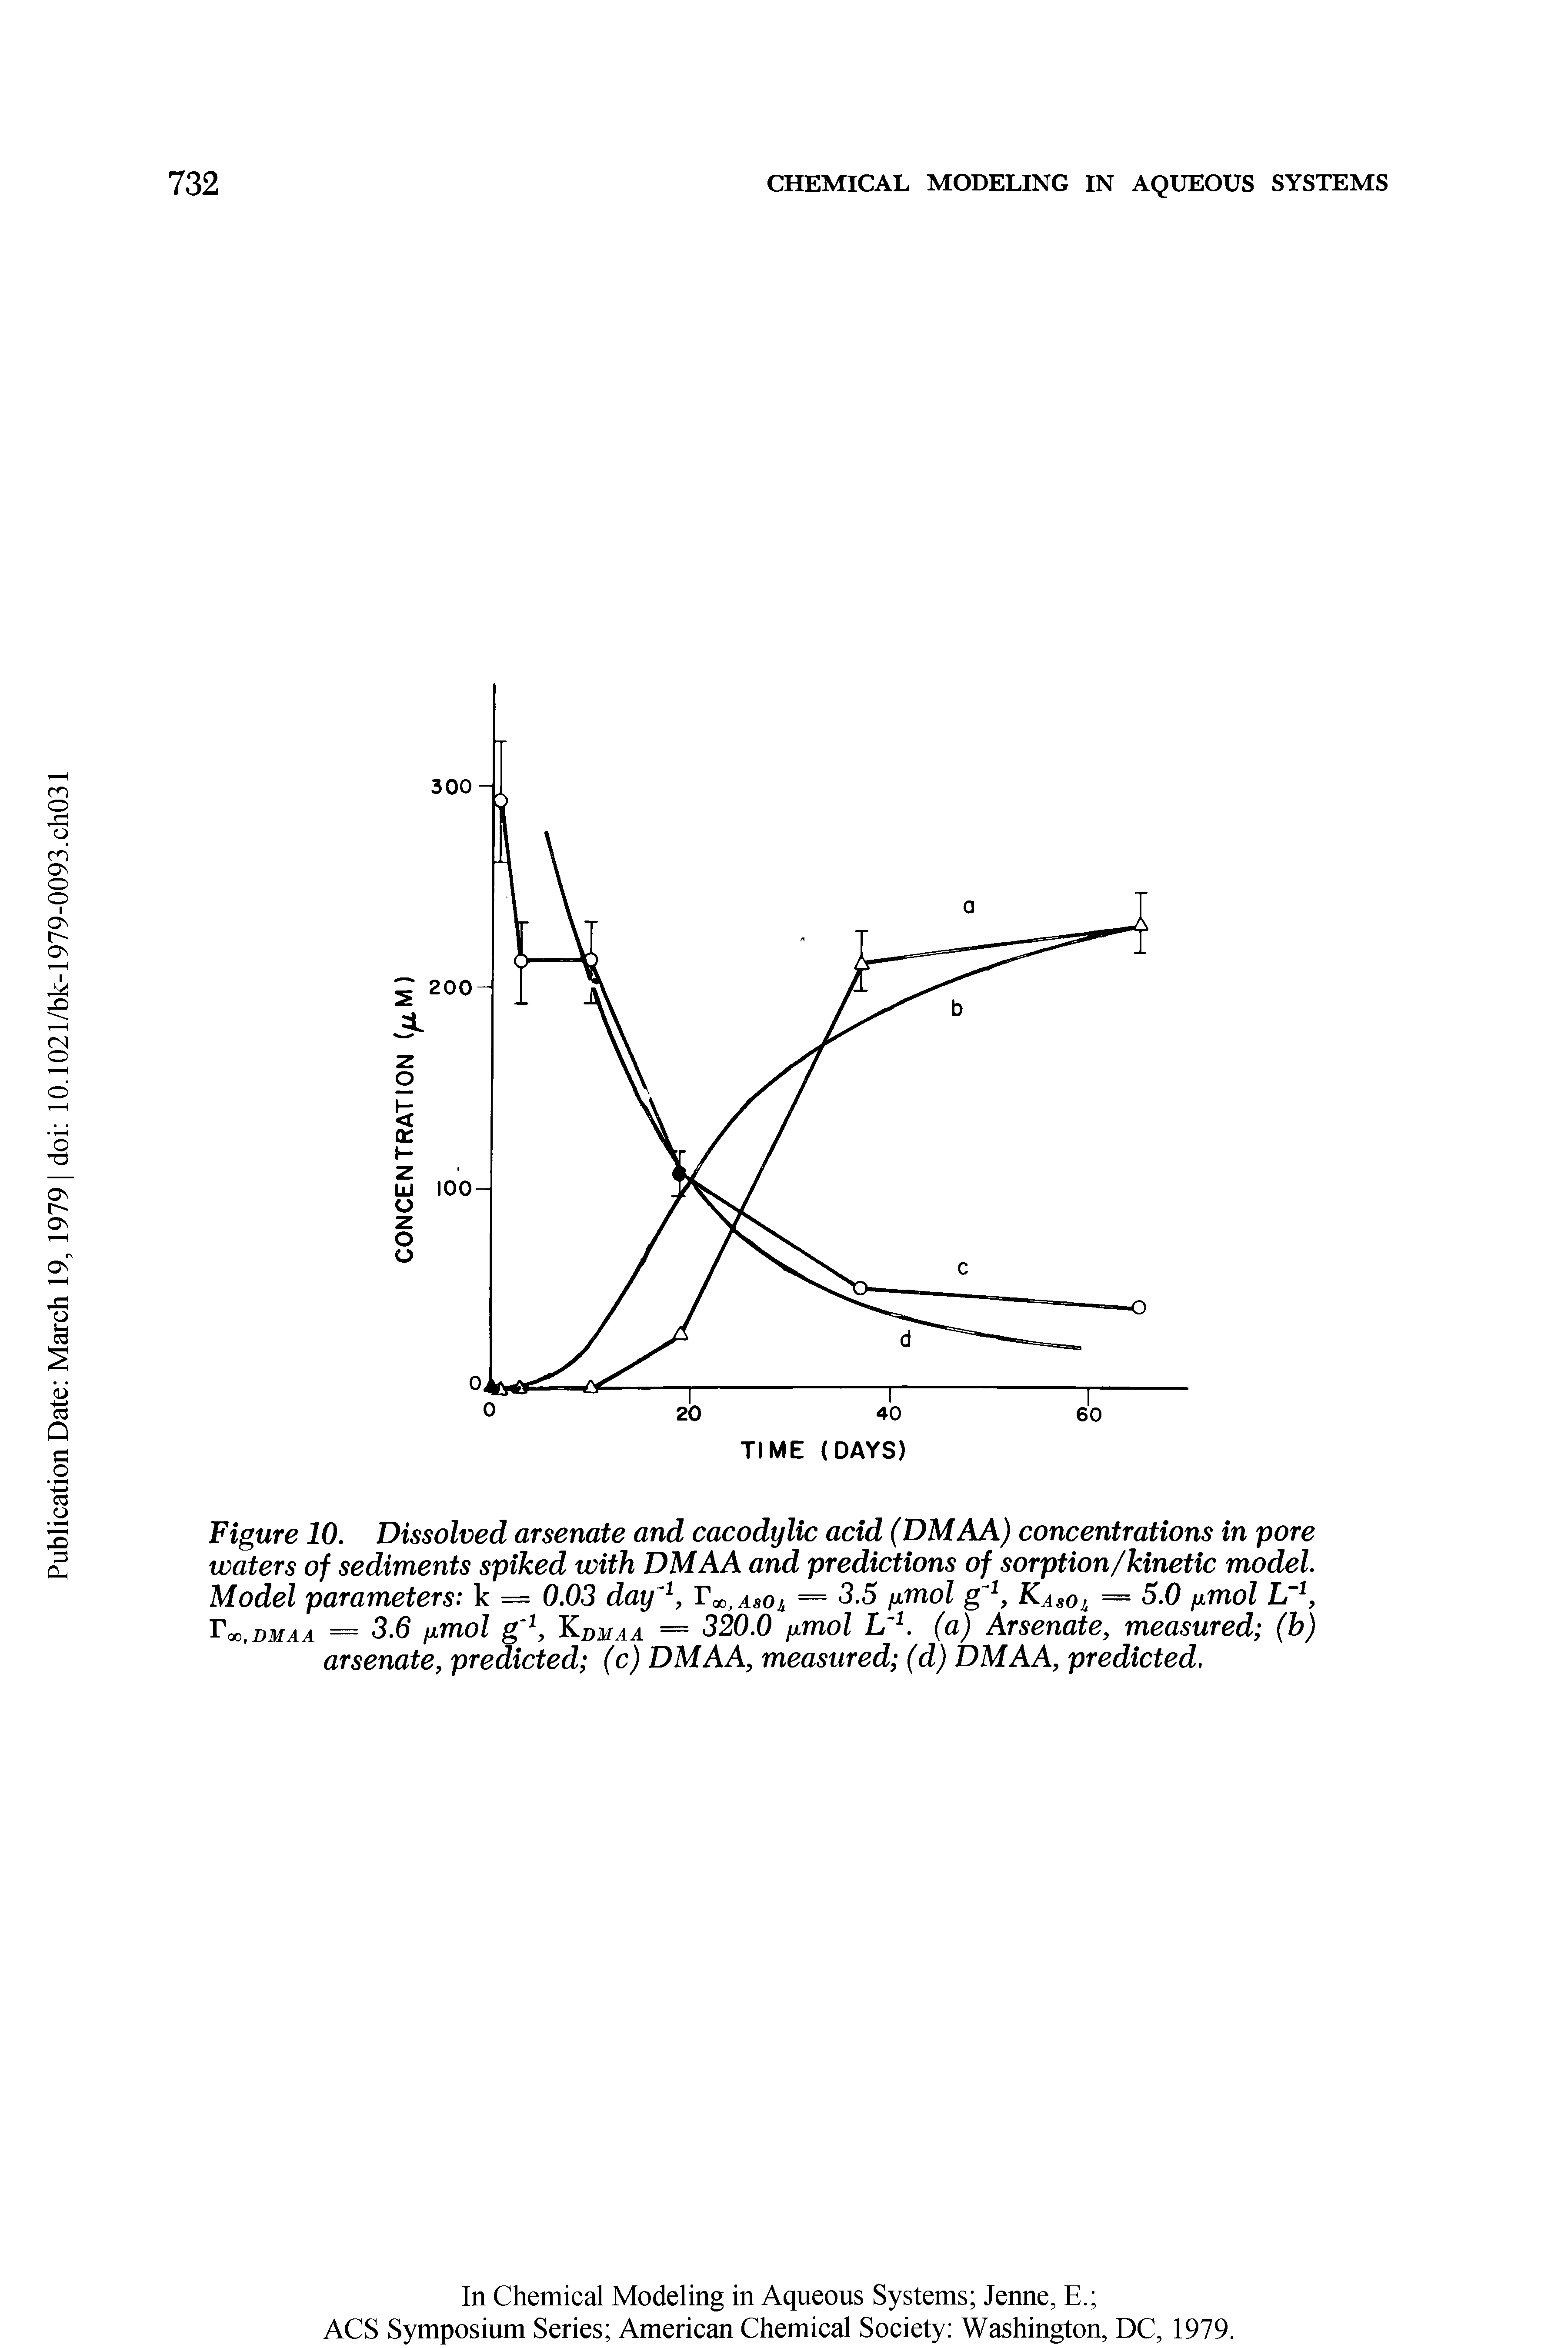 Figure 10. Dissolved arsenate and cacodylic acid (DMAA) concentrations in pore waters of sediments spiked with DMAA and predictions of sorption/kinetic model. Model parameters k = 0.03 day Tcc,asoj, = 3.5 fxmol g Kaso = 5.0 fxmol 00. DMAA = 3.6 fimol Kdmaa = 320.0 fxmol L K (a) Arsenate, measured (h) arsenate, predicted (c) DMAA, measured (d) DMAA, predicted.